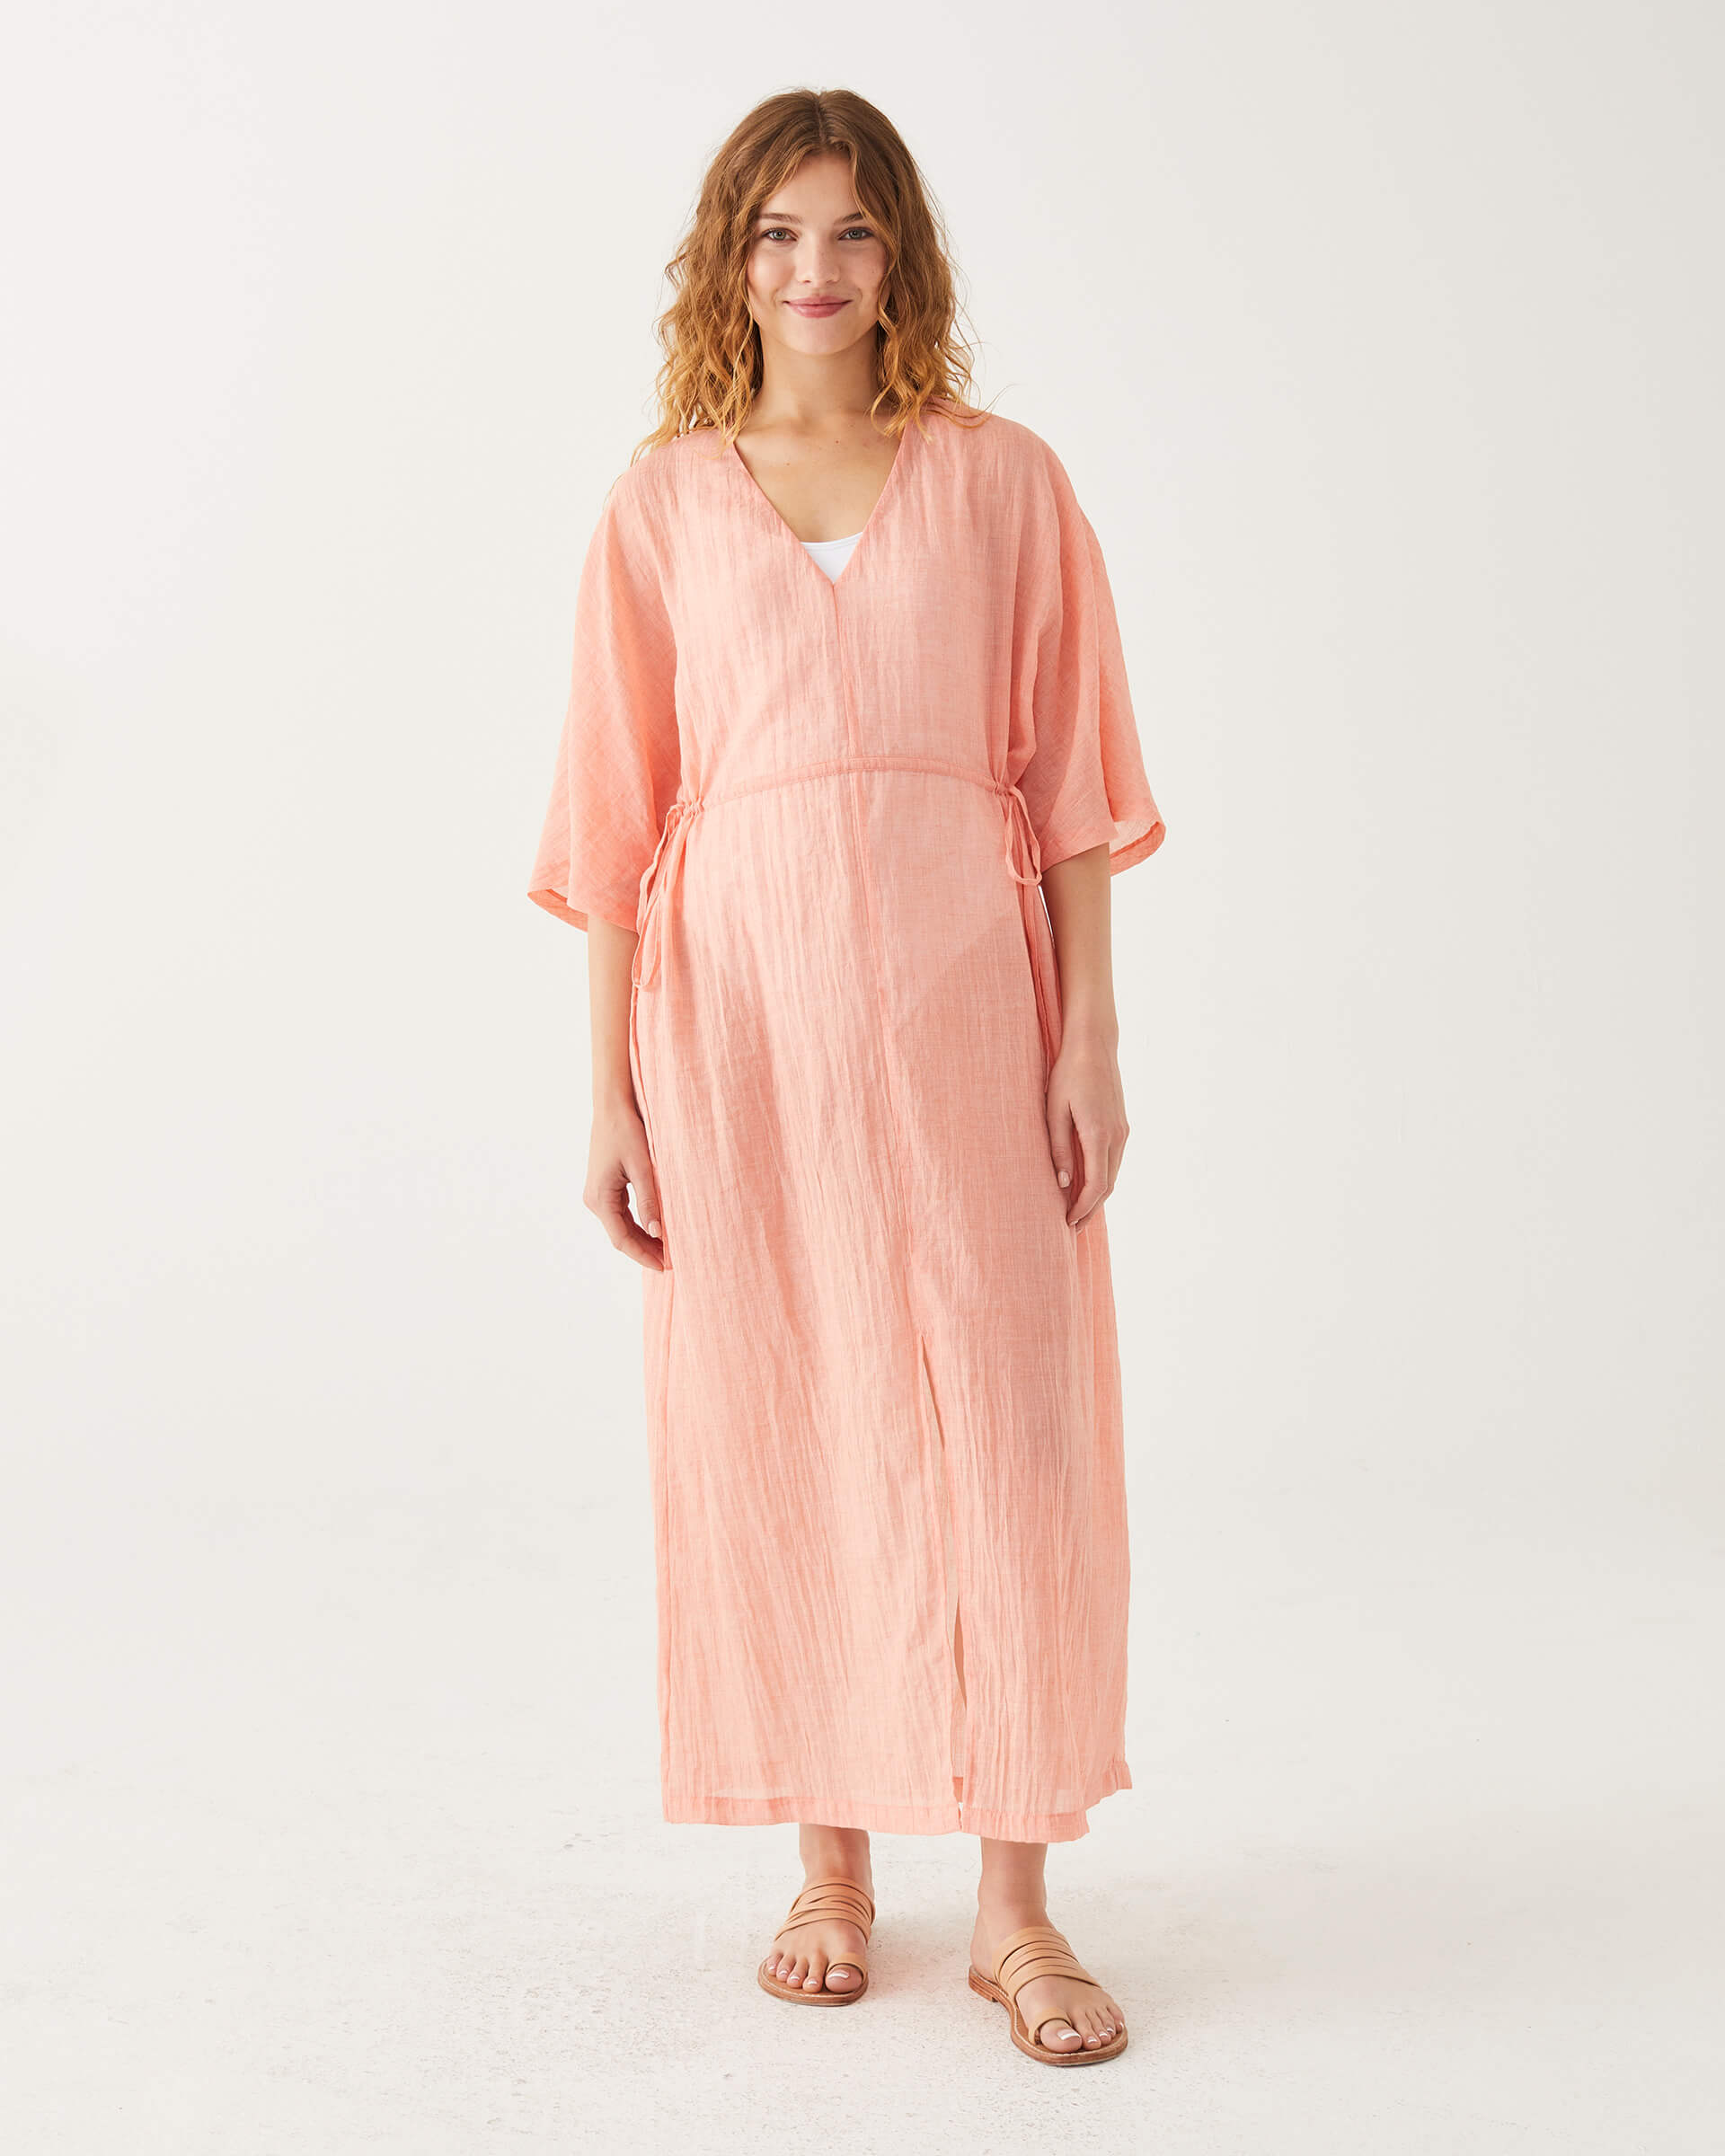 Breezy Caftan » eat.sleep.wear. – Fashion & Lifestyle Blog by Kimberly  Lapides